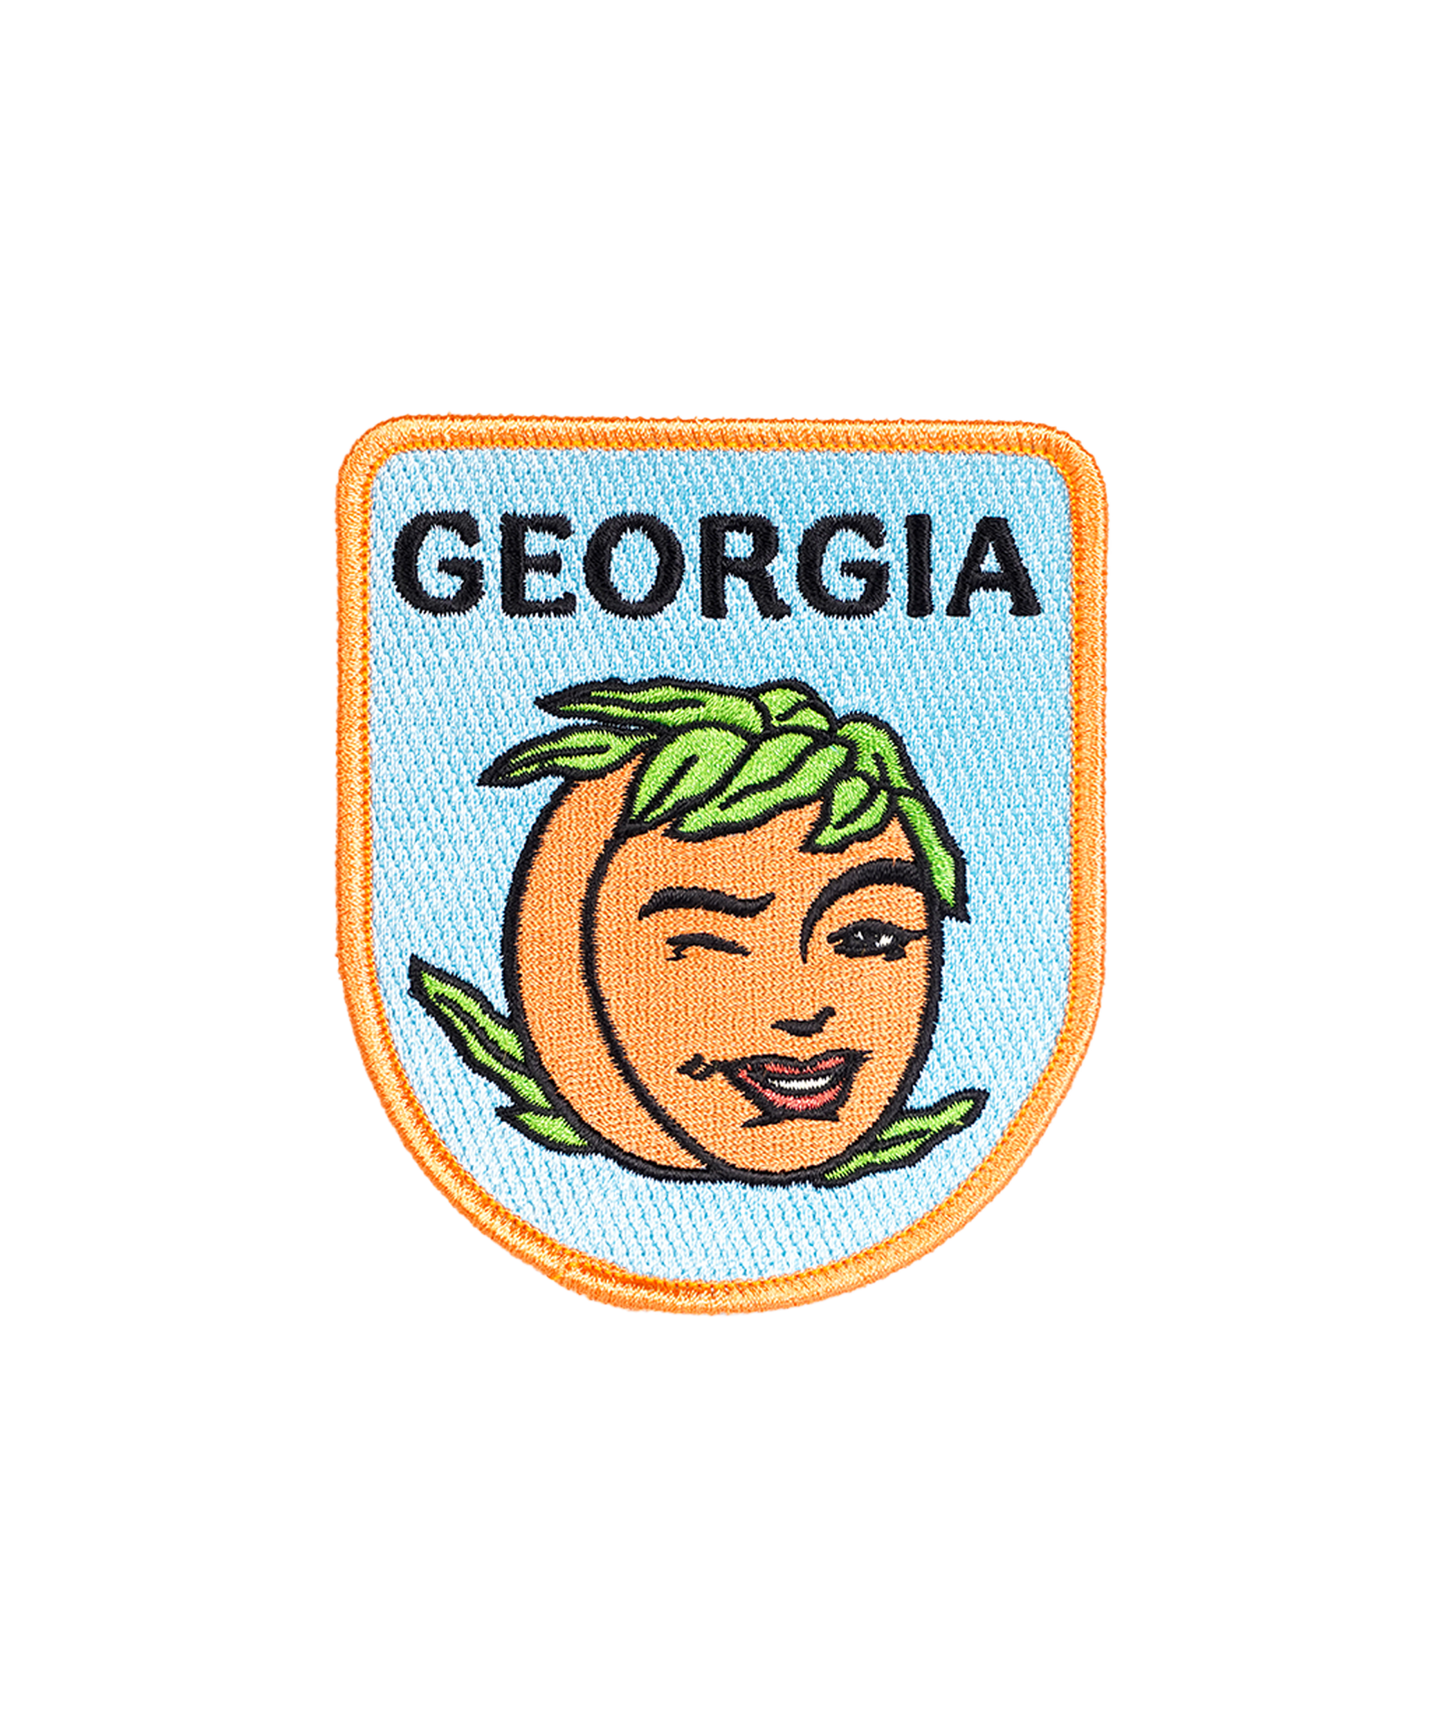 Georgia Embroidered Patch